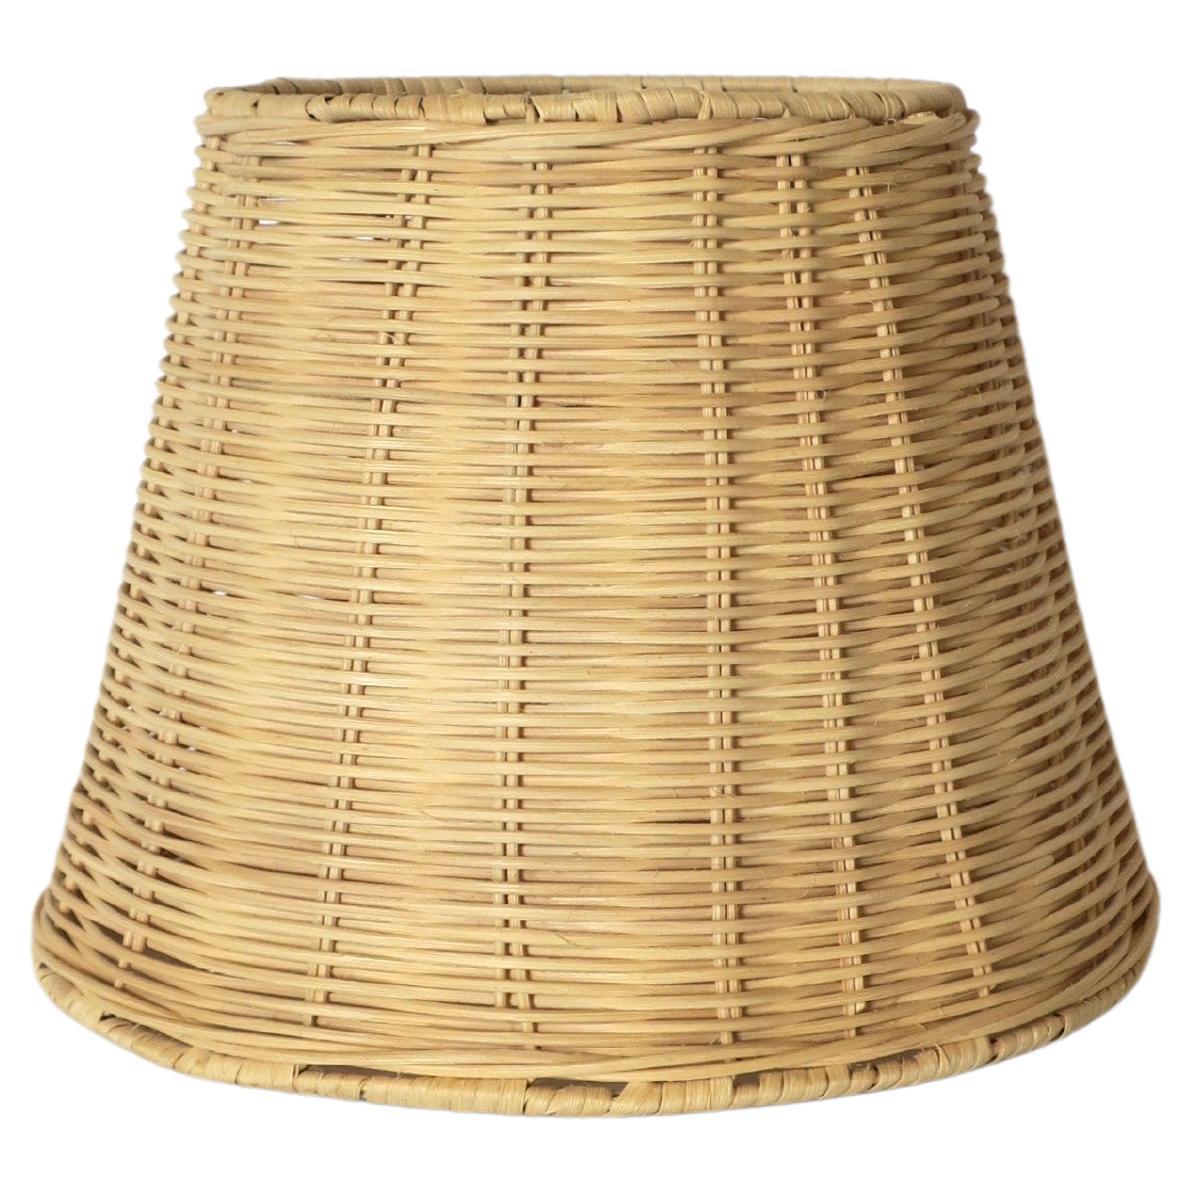 Wicker Lamp Shade For Sale